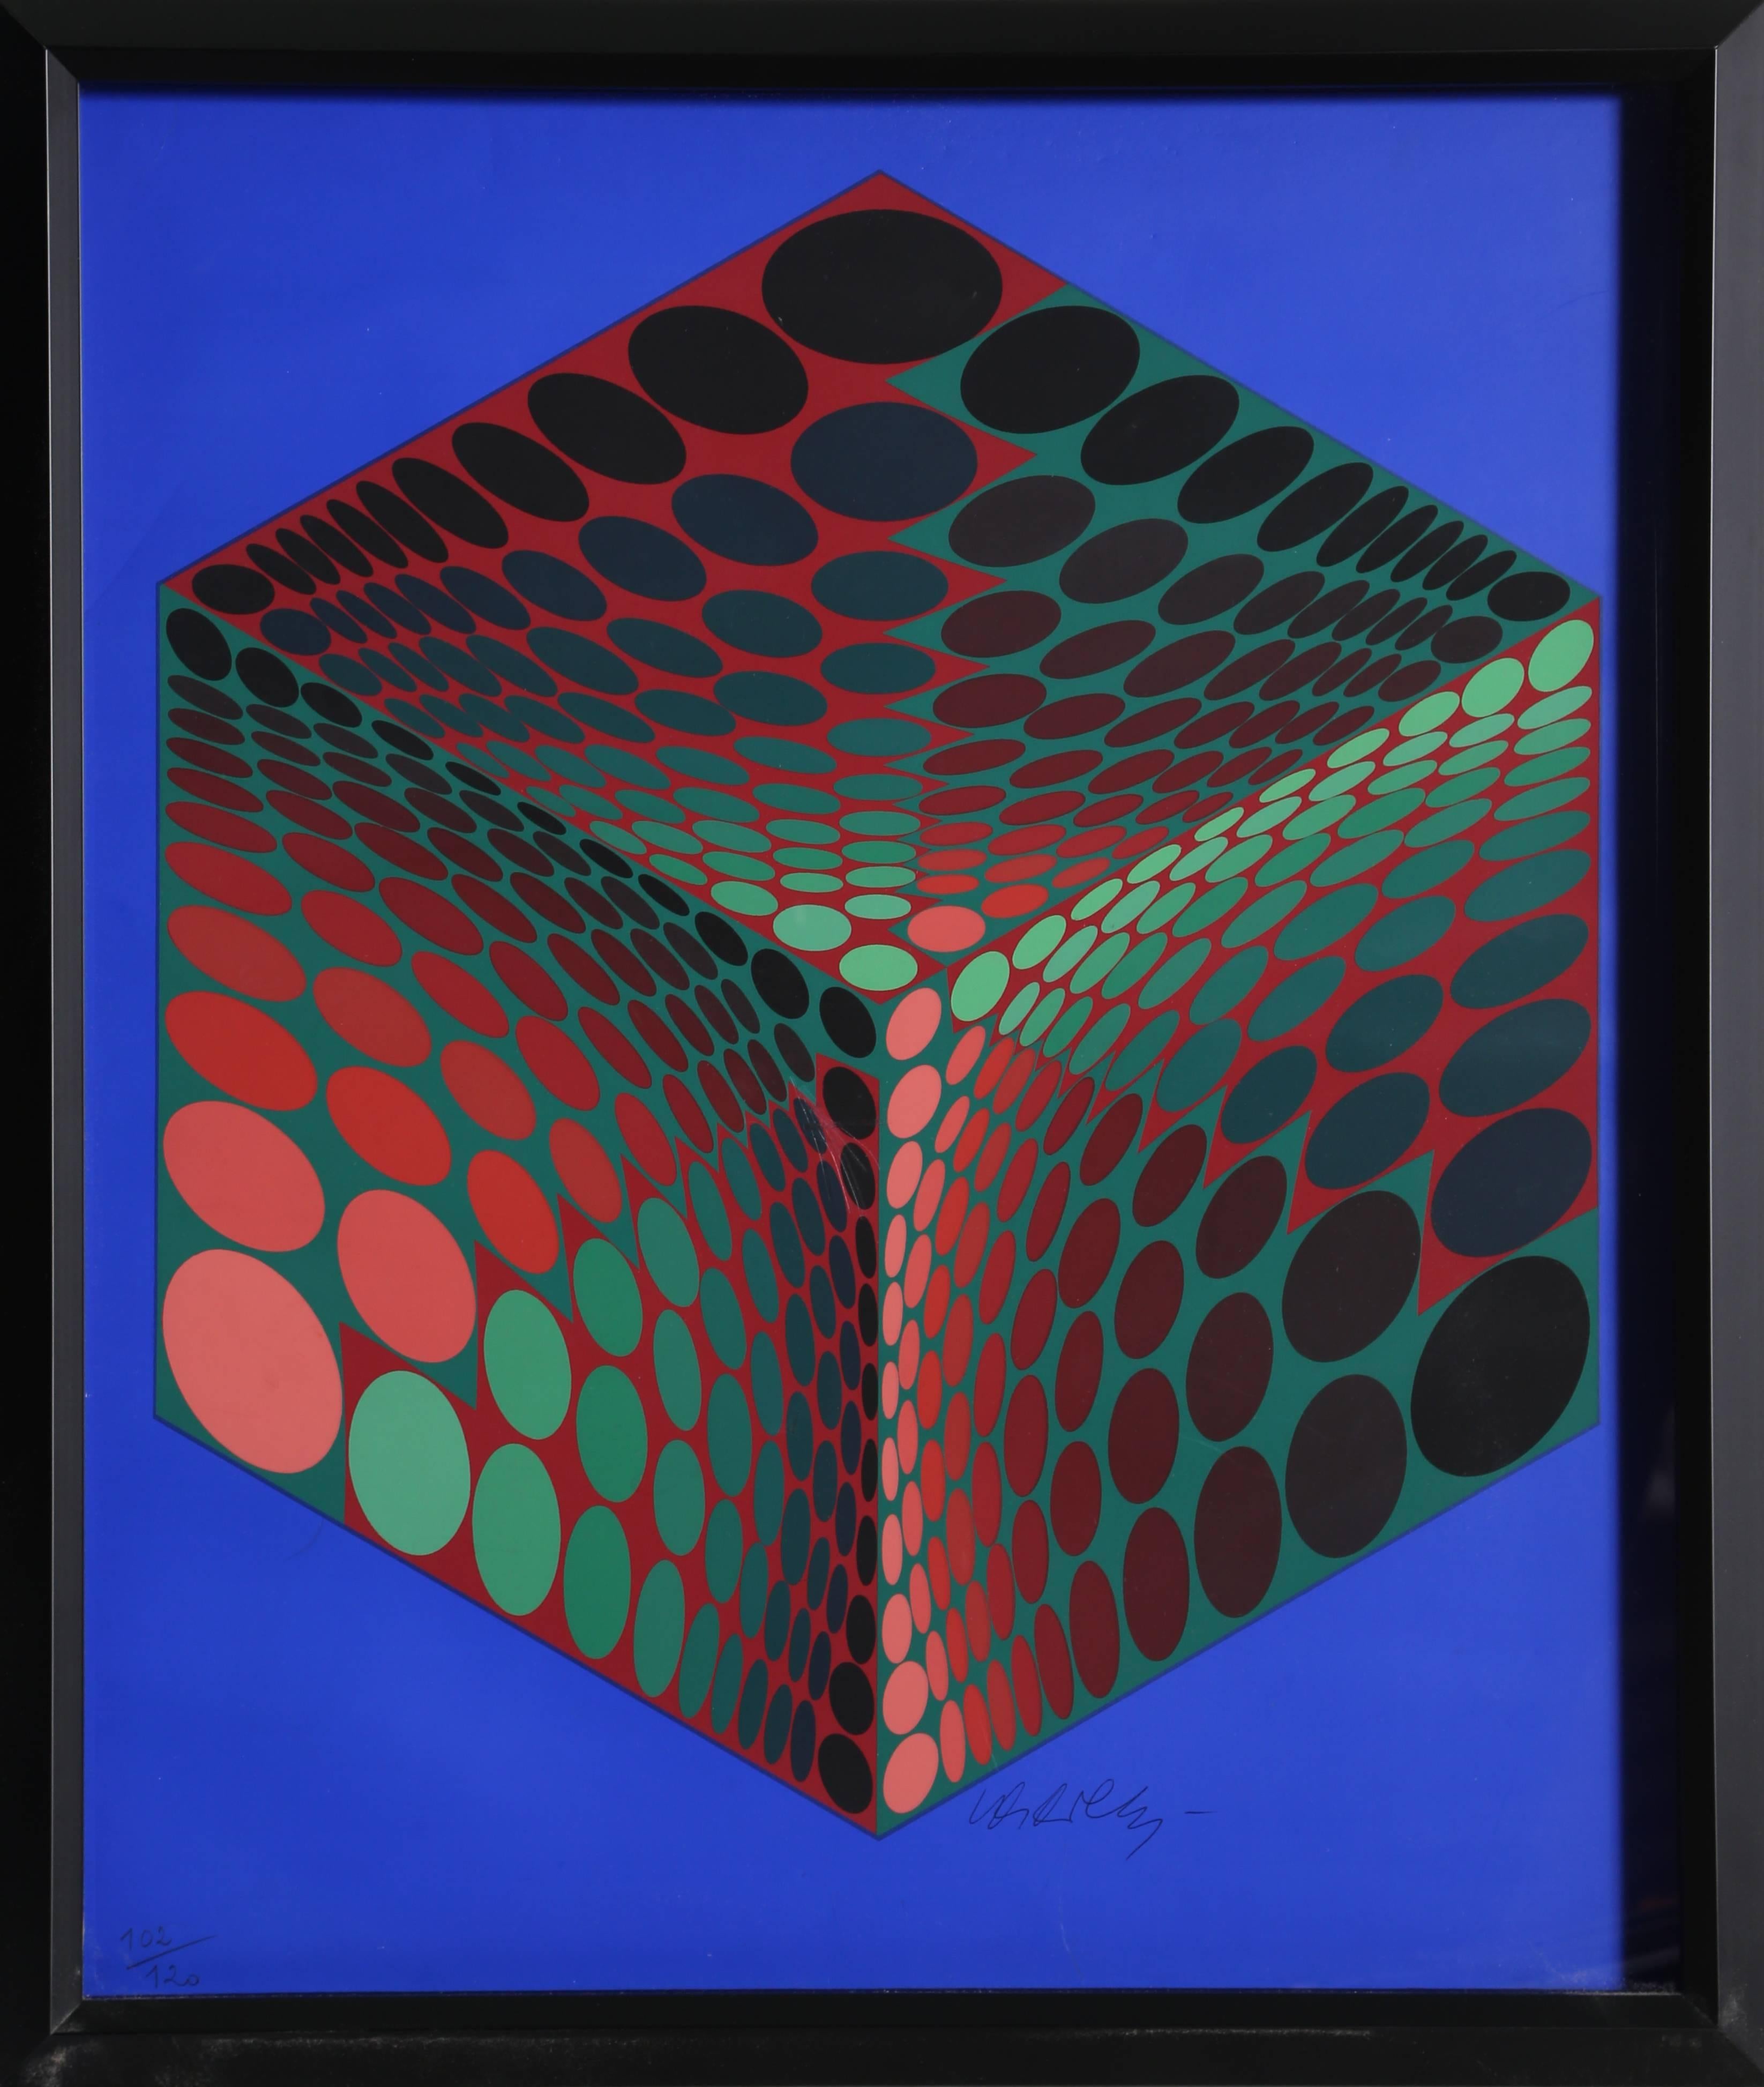 Victor Vasarely Abstract Print - Parmenide (Green, Black, and Red on Blue)